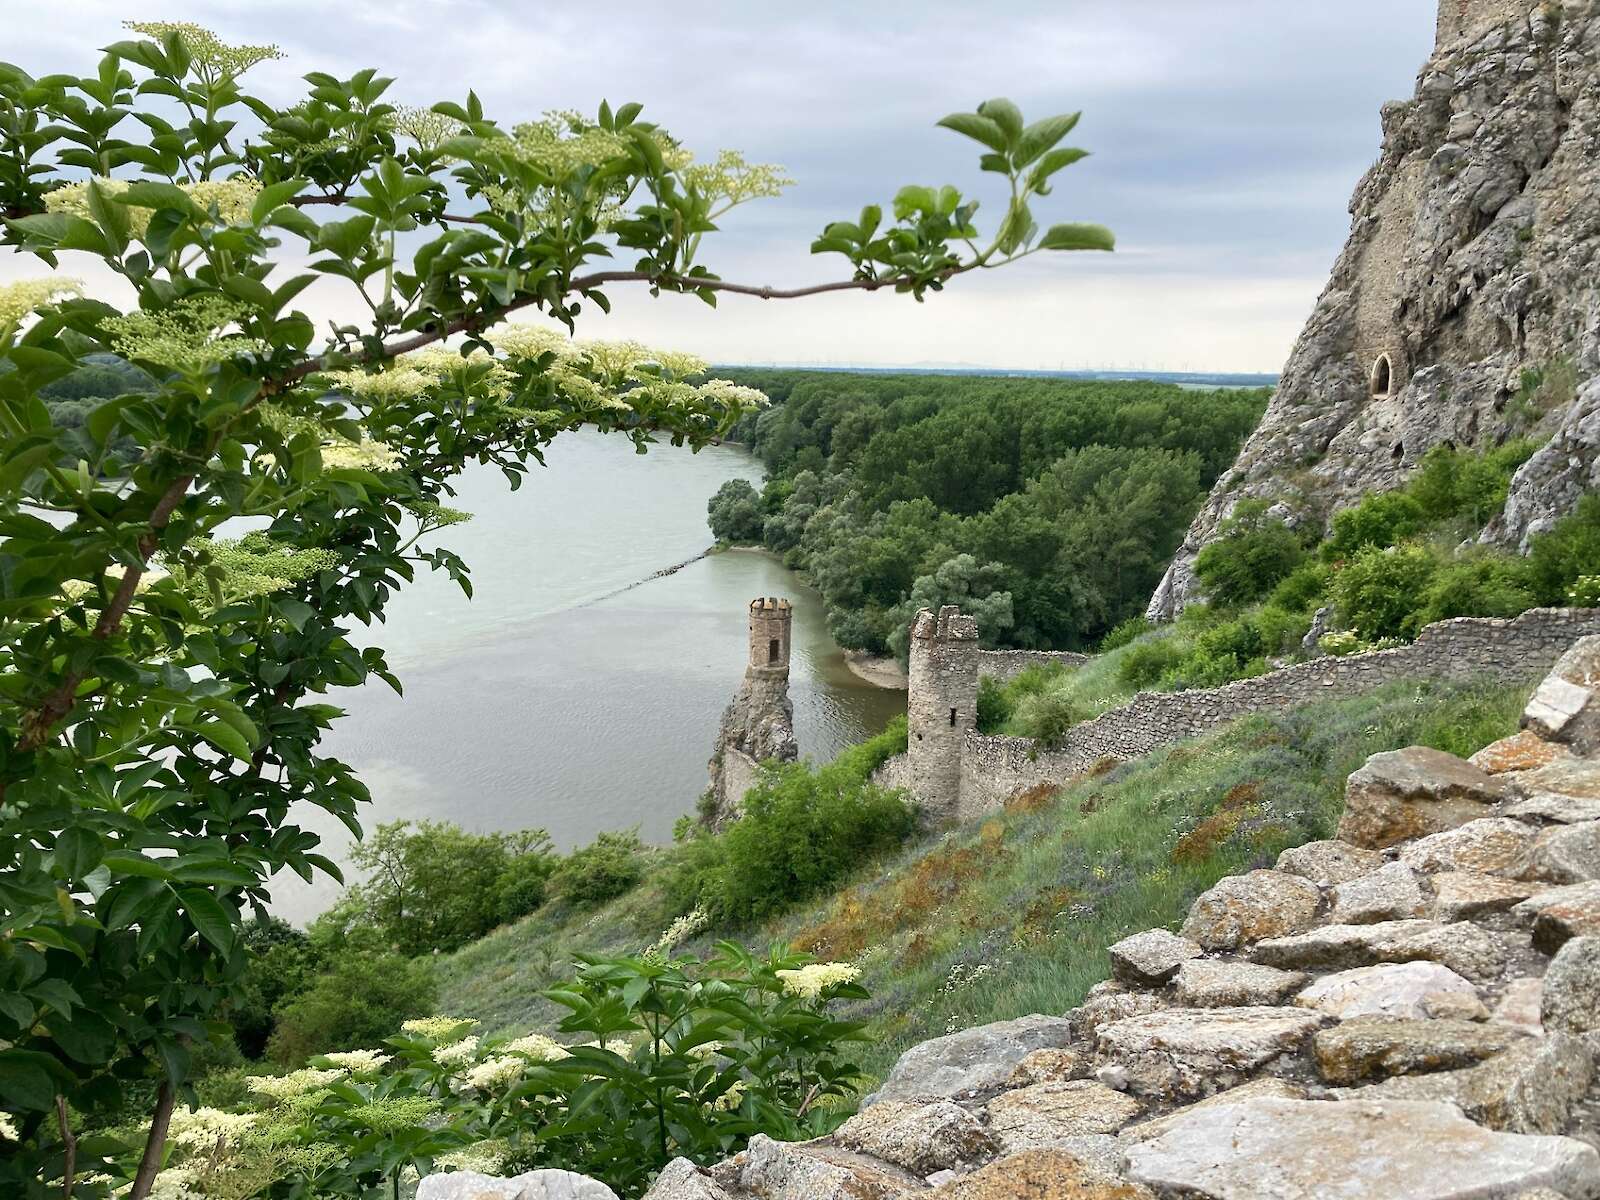 The confluence of the Morava River and the Danube at Castle Devin